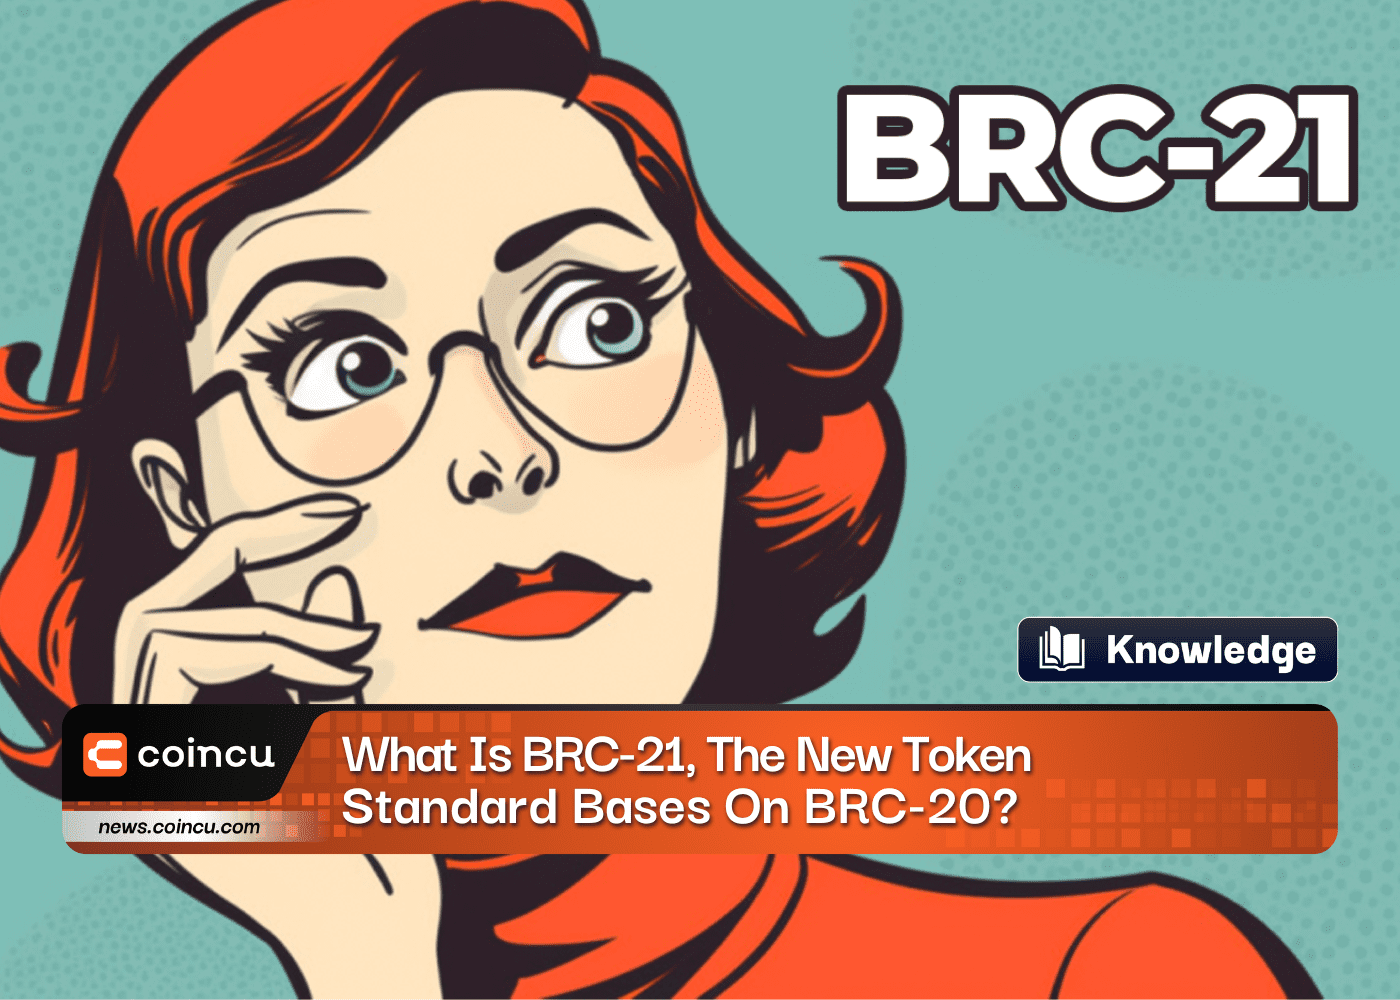 What Is BRC-21, The New Token Standard Bases On BRC-20?